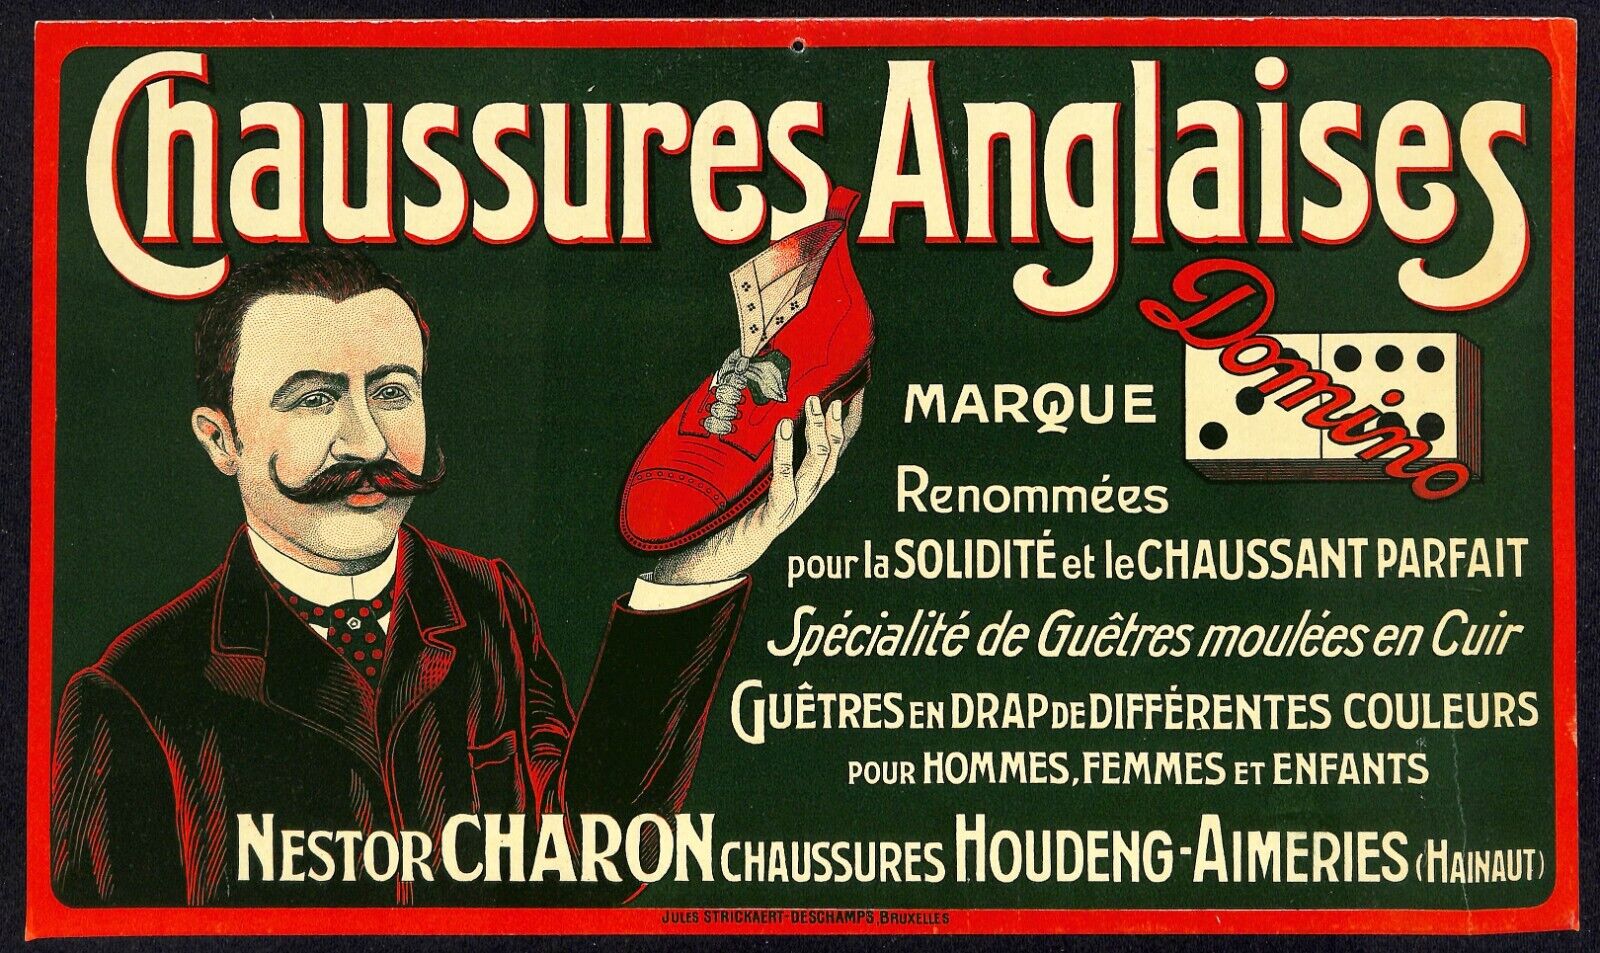 Vintage French Poster Sign - Chaussures Anglaises (English Shoes) c1960's-70's